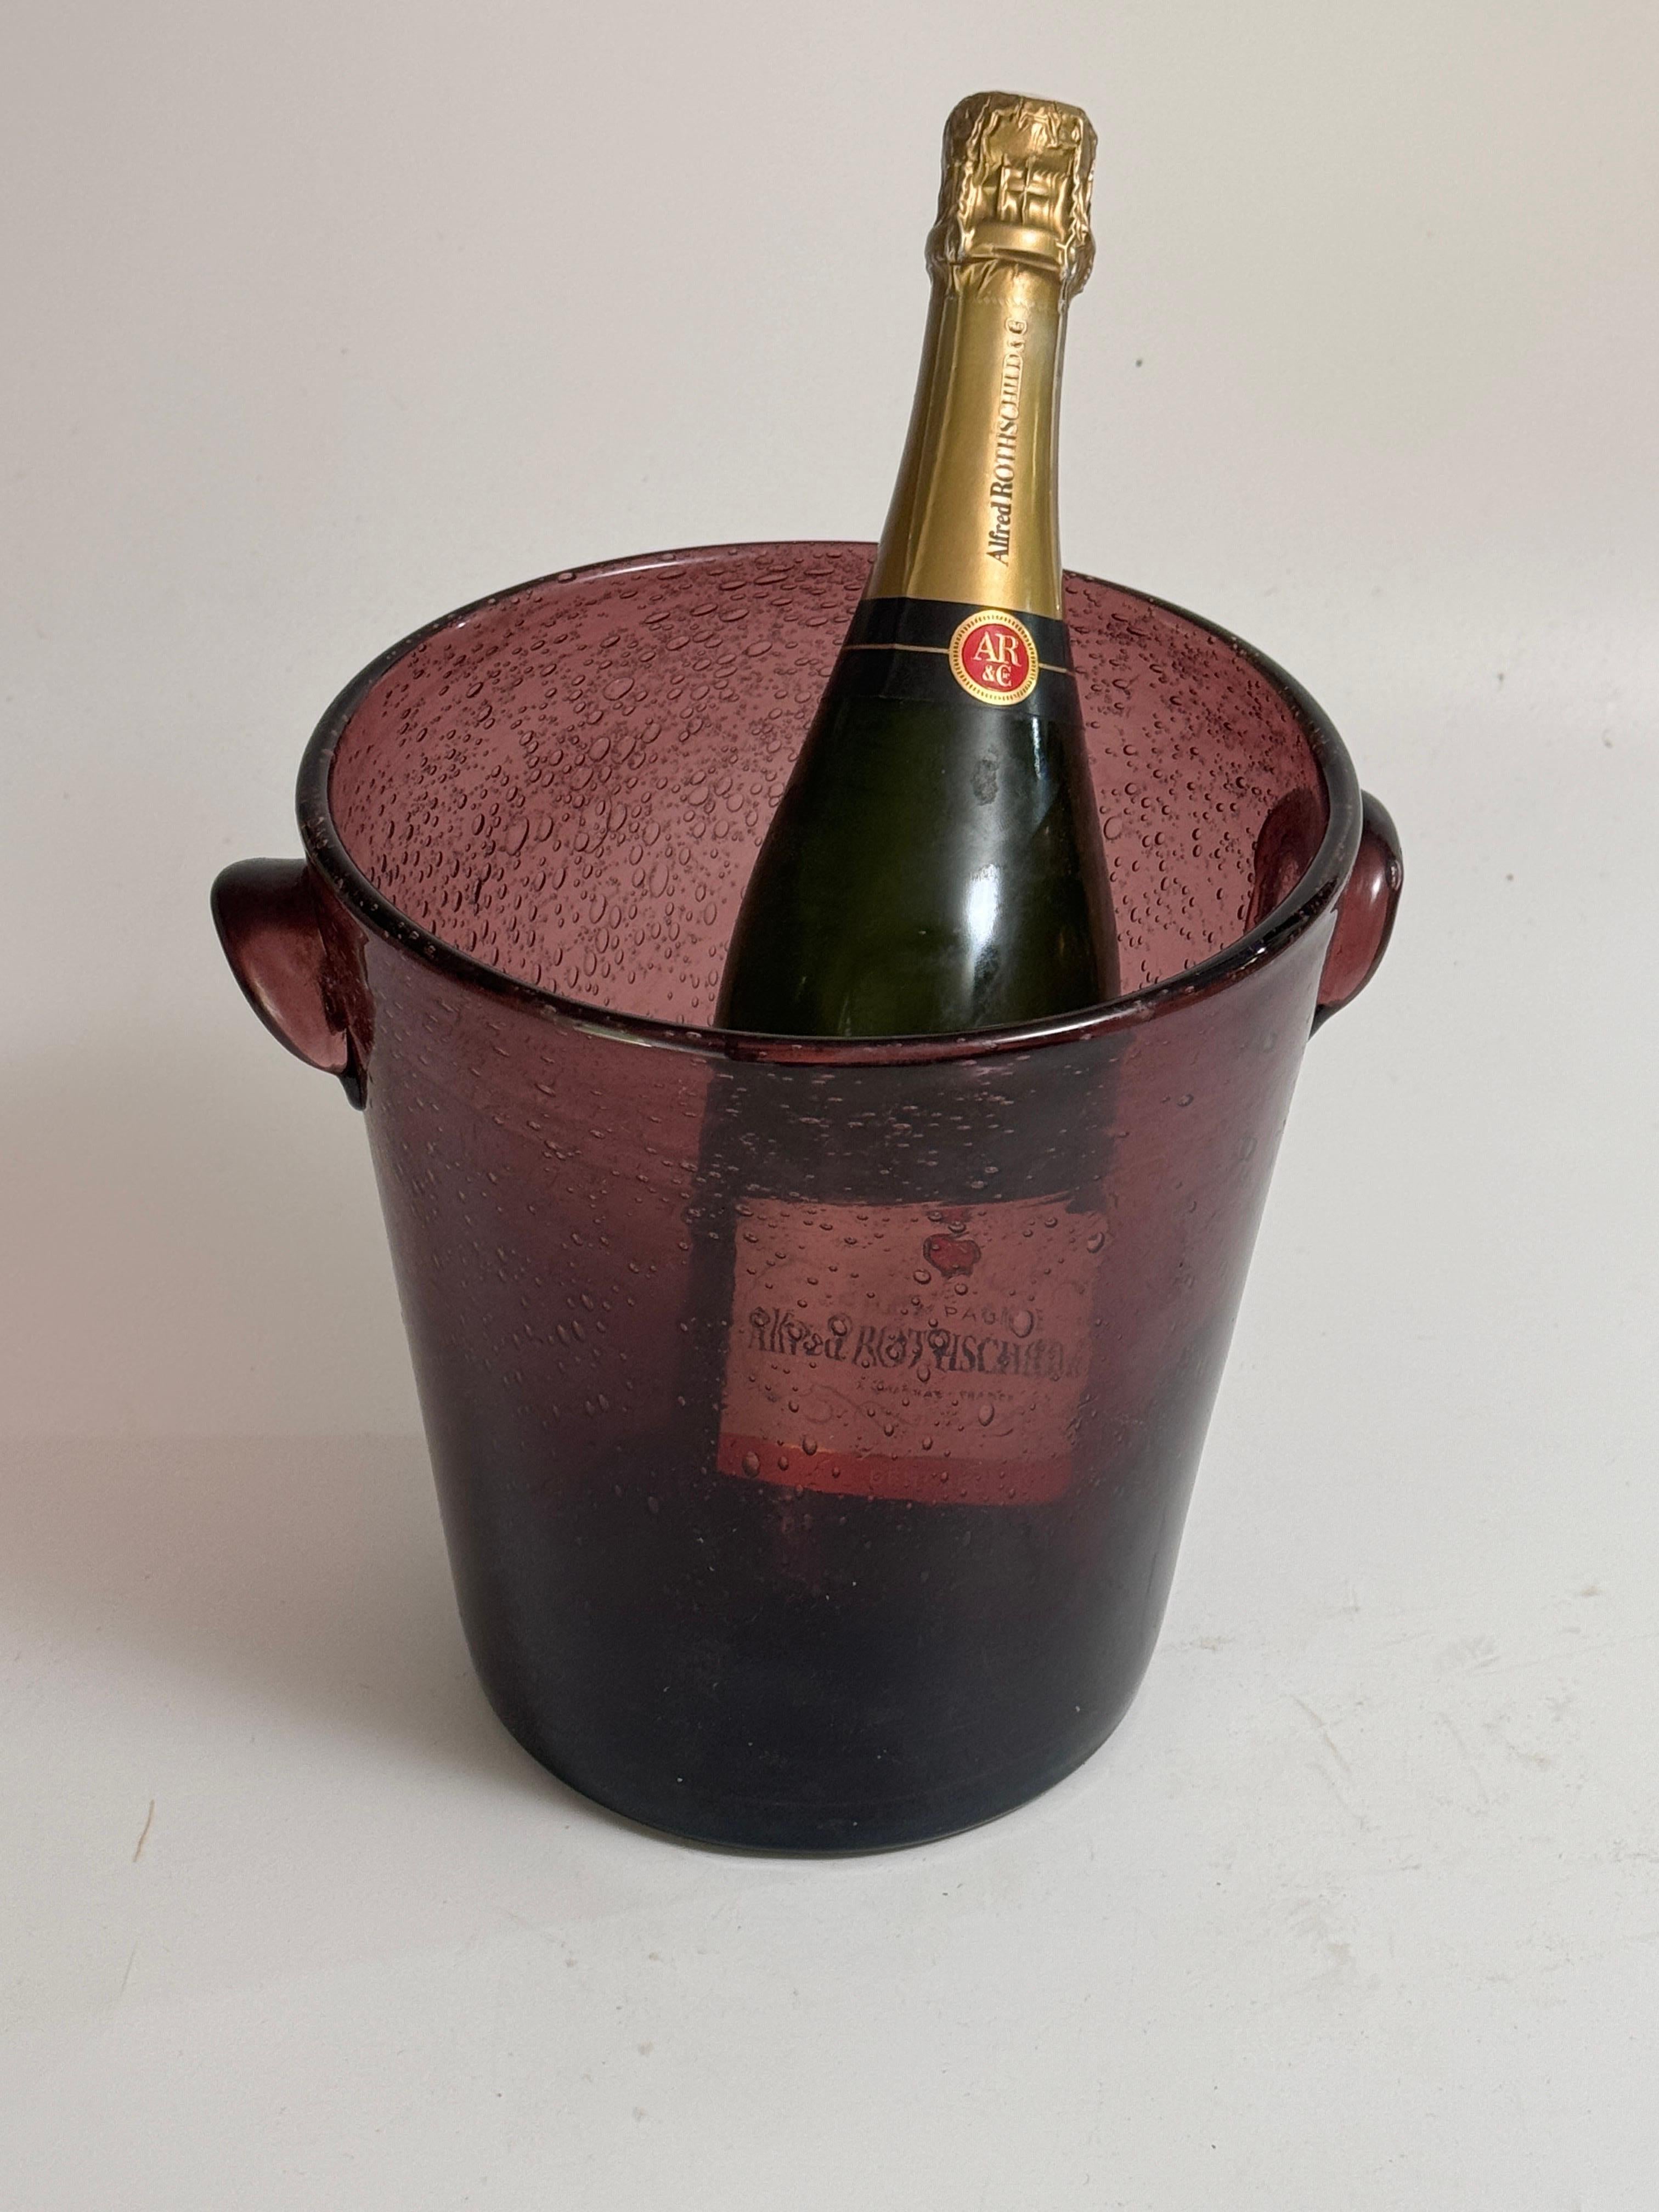 Magnifical, Champagne bucket, made by the well known glass firm BIOT in the South of France, near Vallauris.
See the details in pictures to see how the color is beautiful.